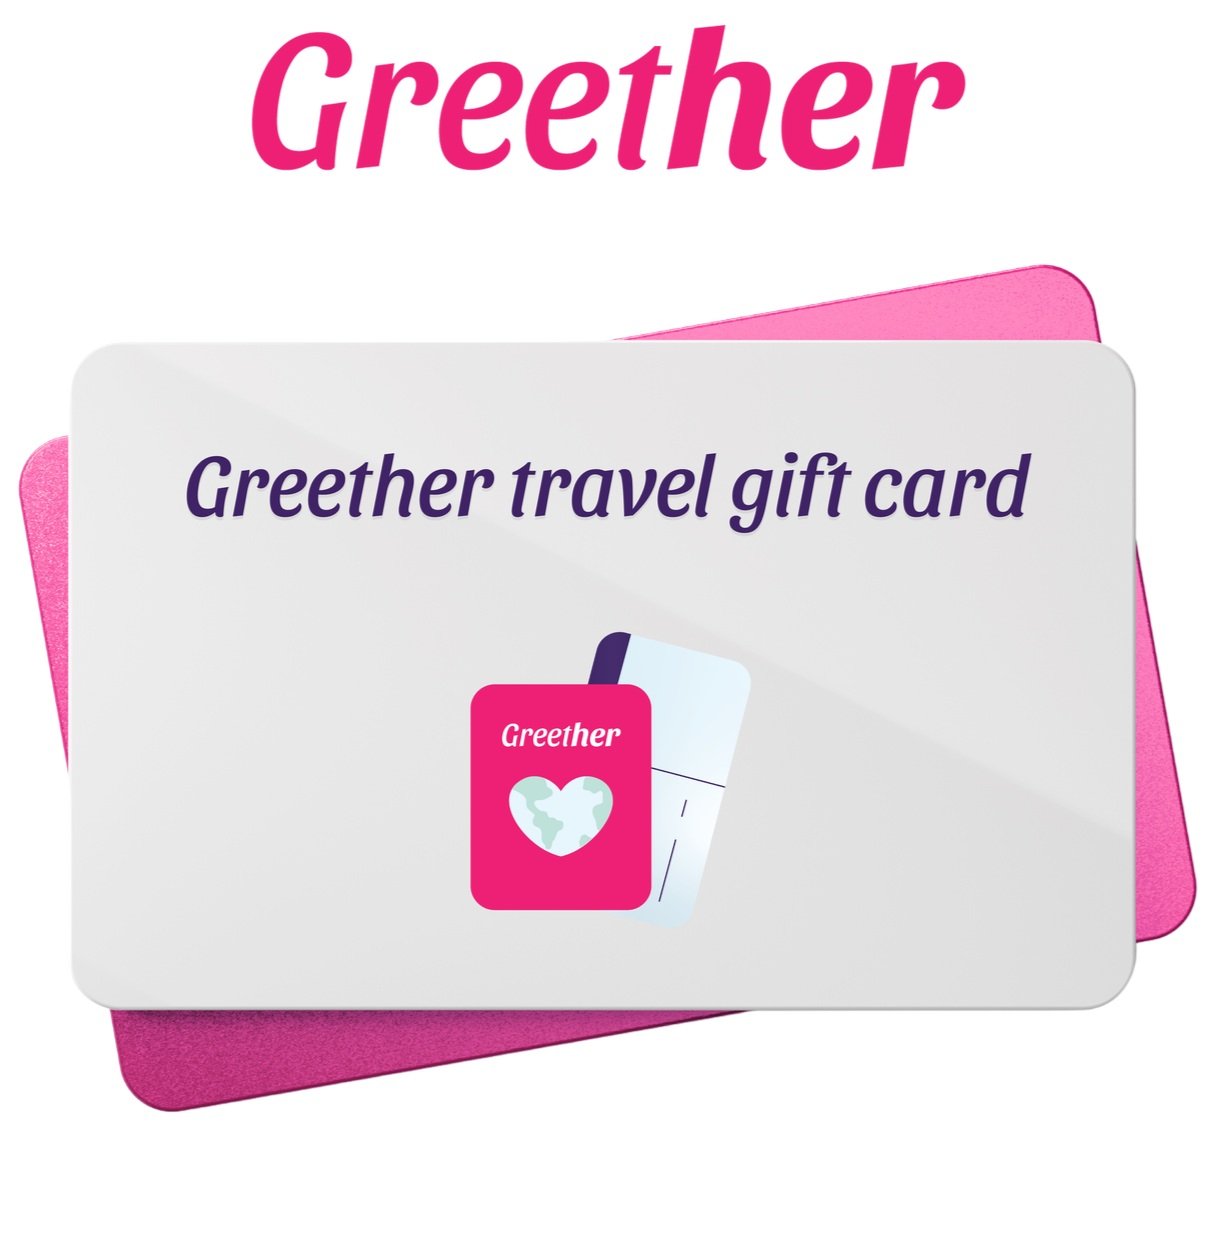 Book a Greeter on your next trip an travel safer, female travelers safety